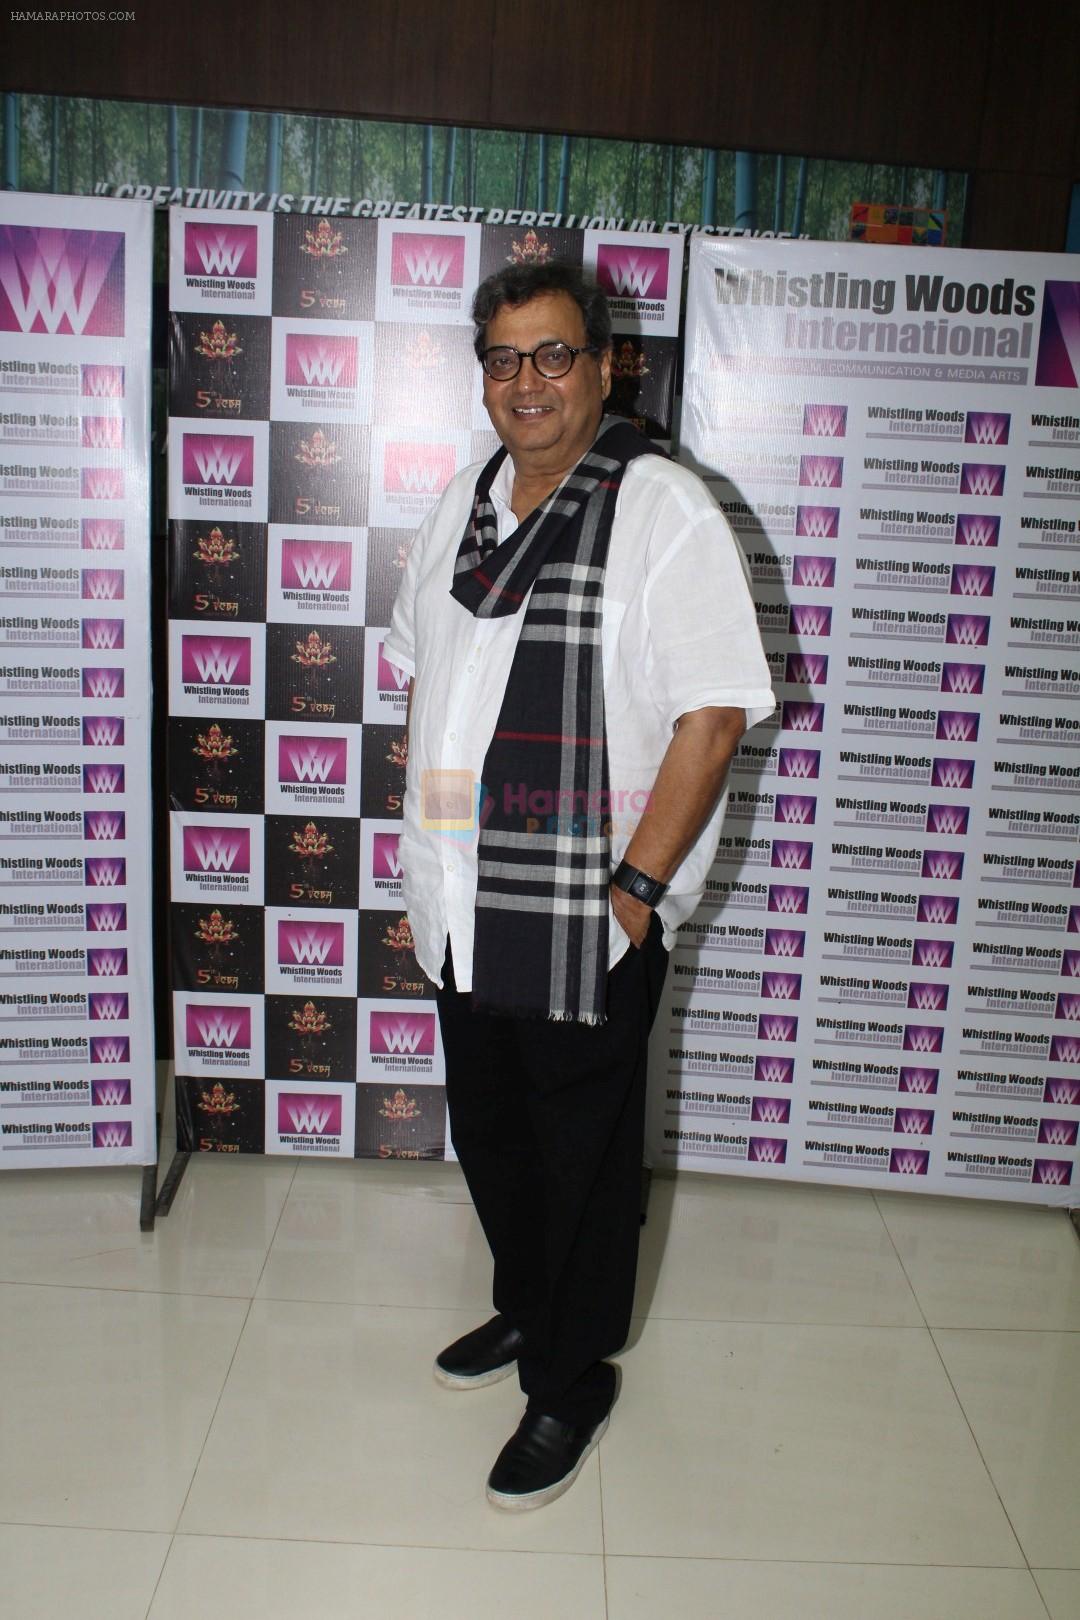 Subhash Ghai along with Manoj Bajpayee Intract With Whistling Woods International Students